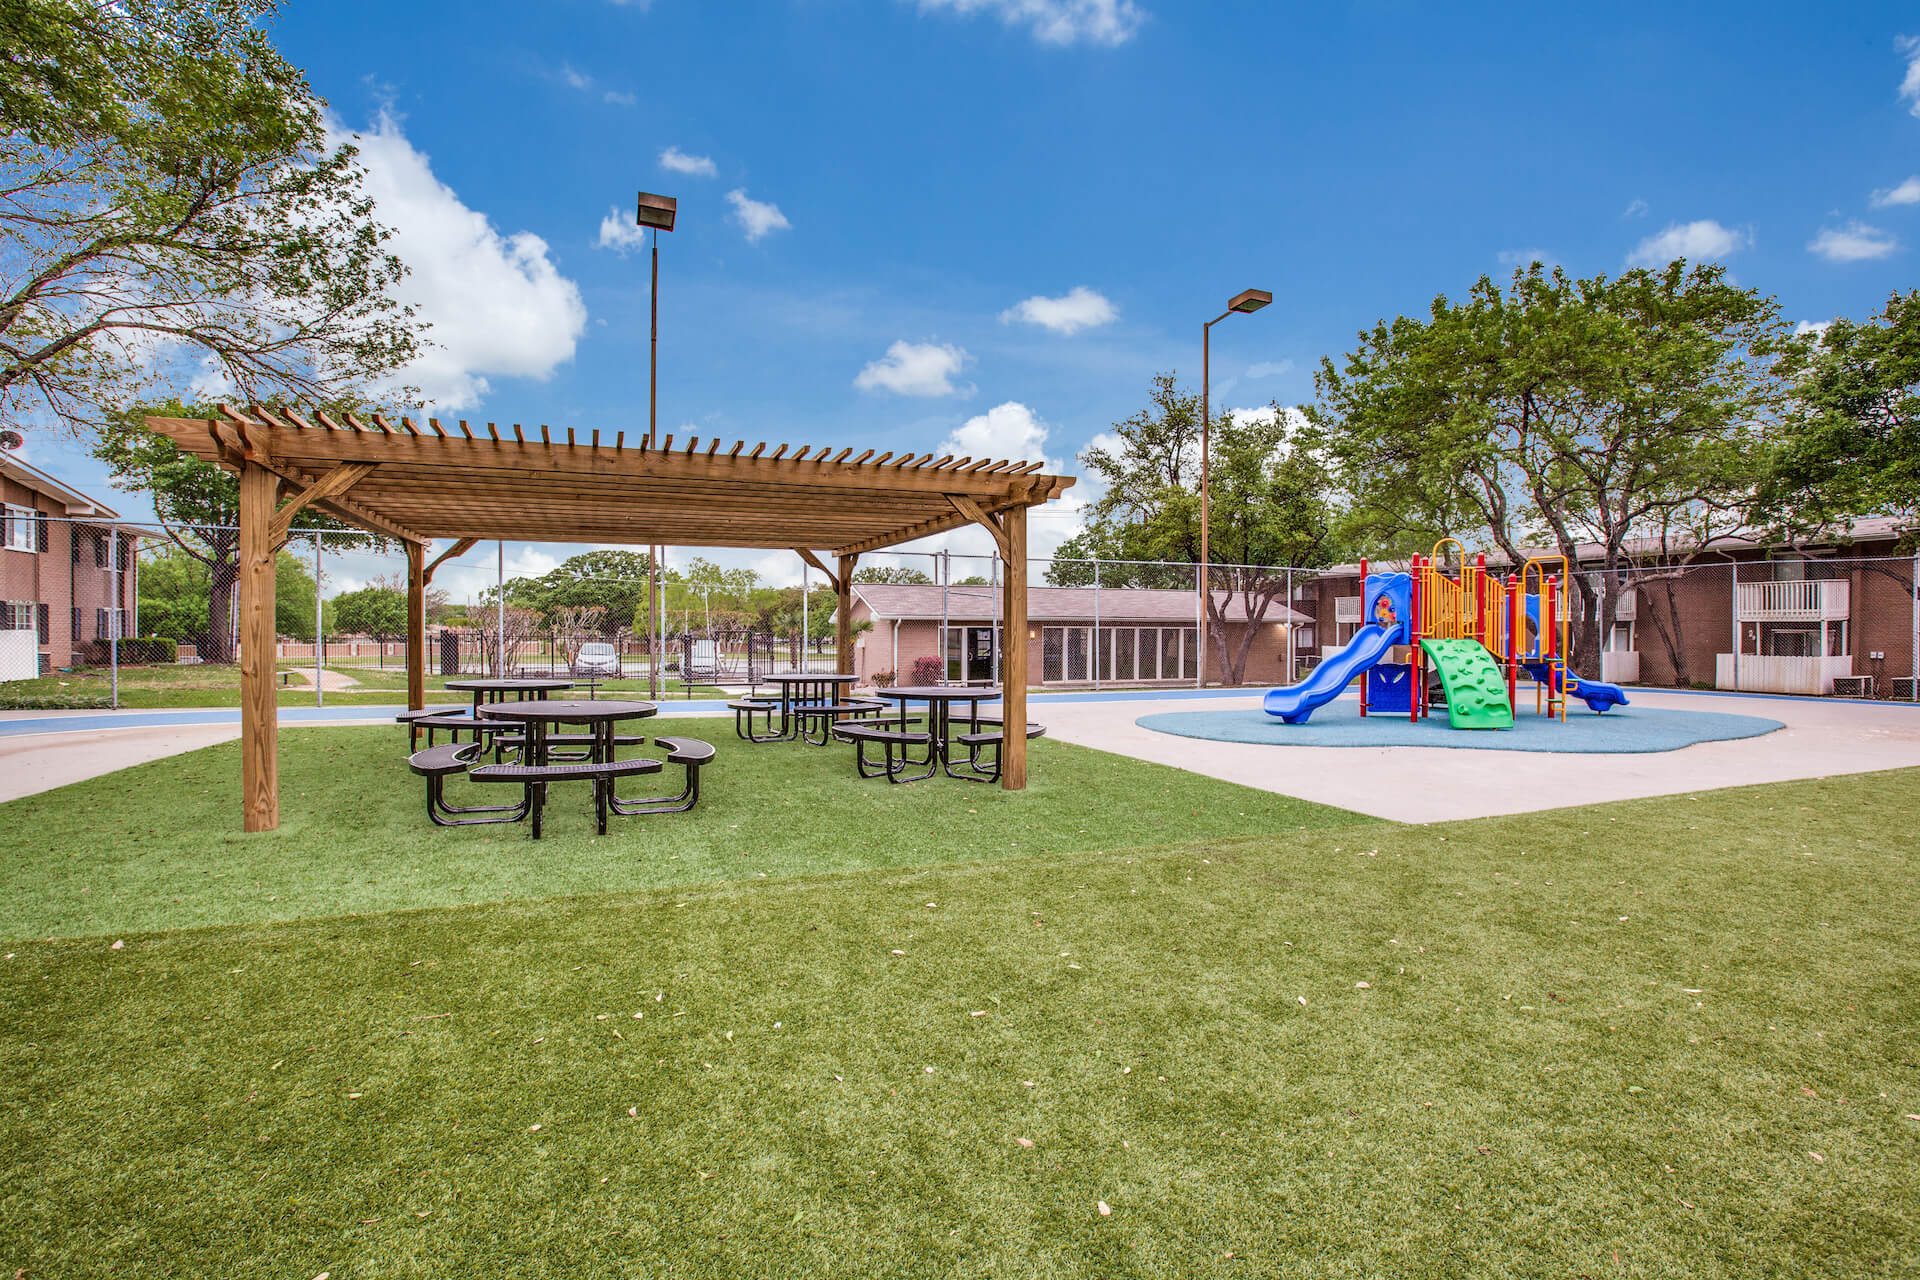 children's play structure and nearby tables with seats under a veranda